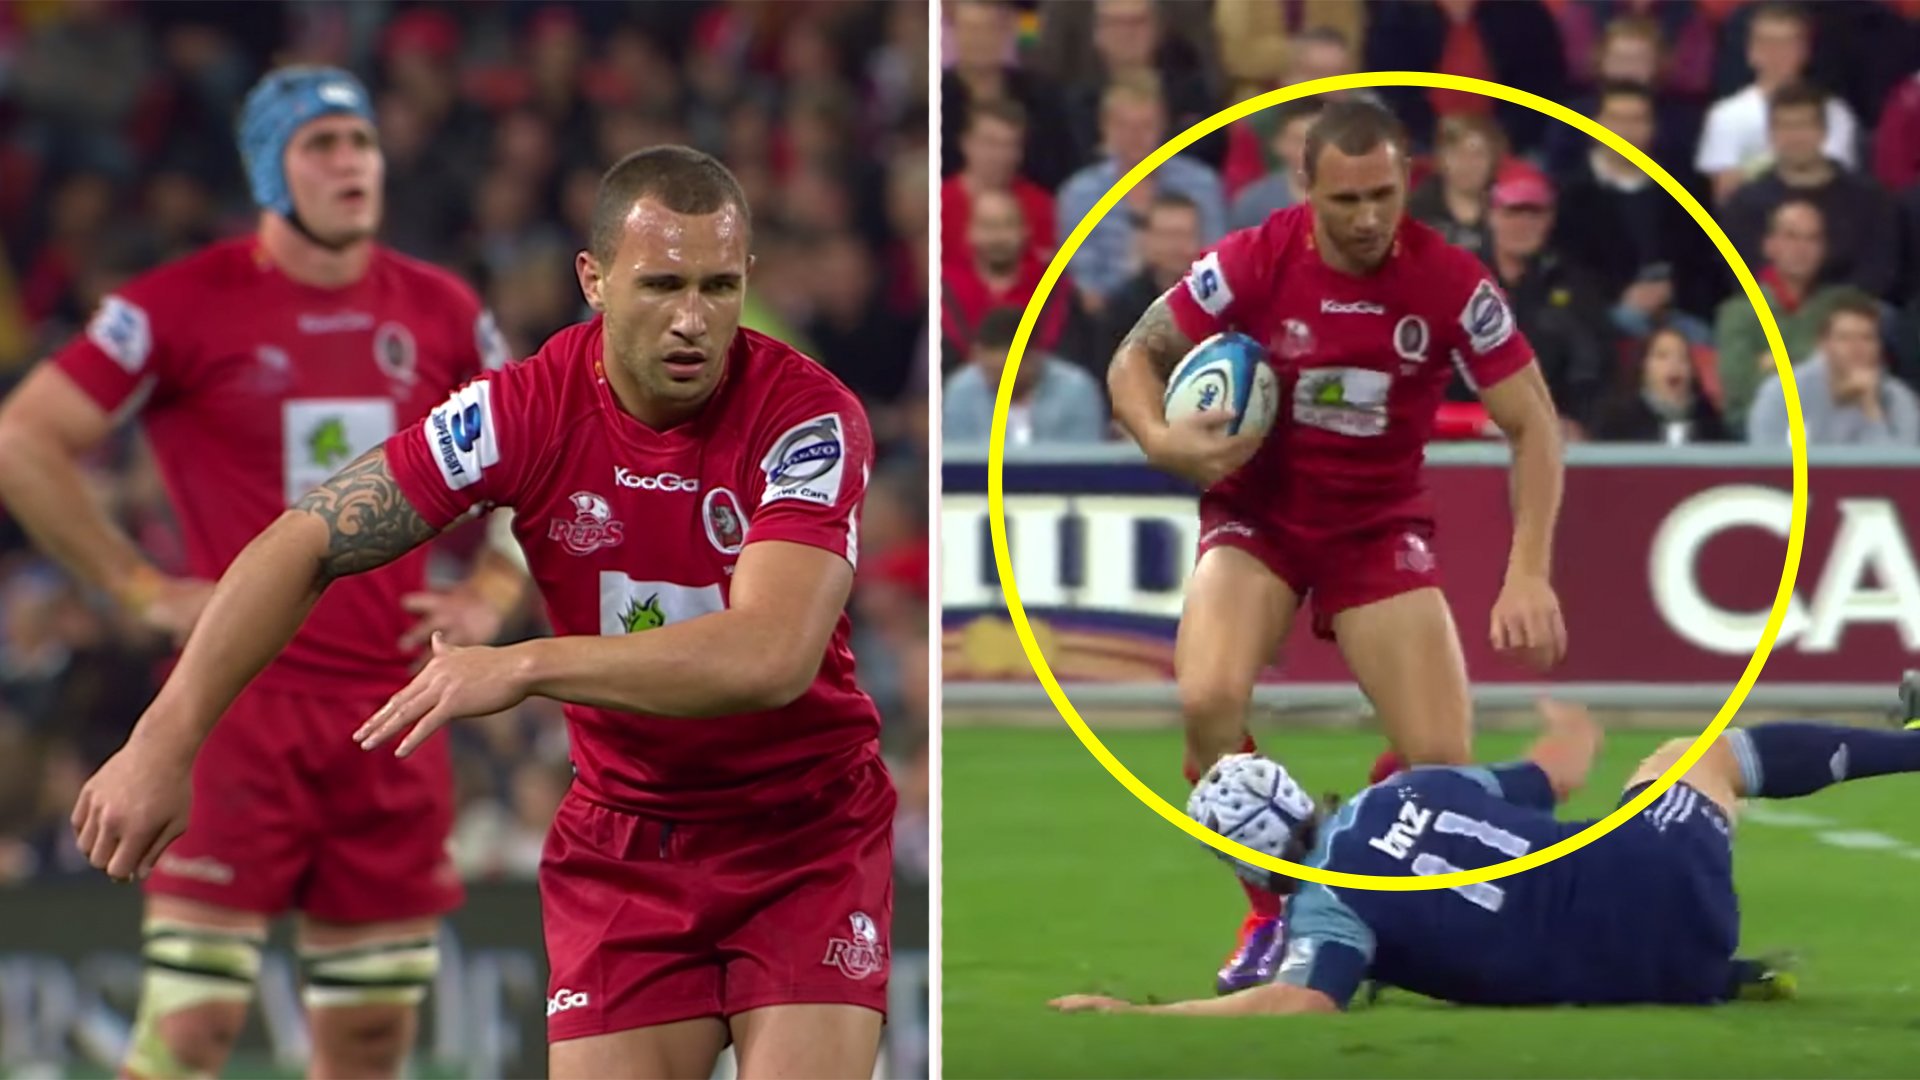 Australia have released the clip where Quade Cooper proved to the world that he was the real deal